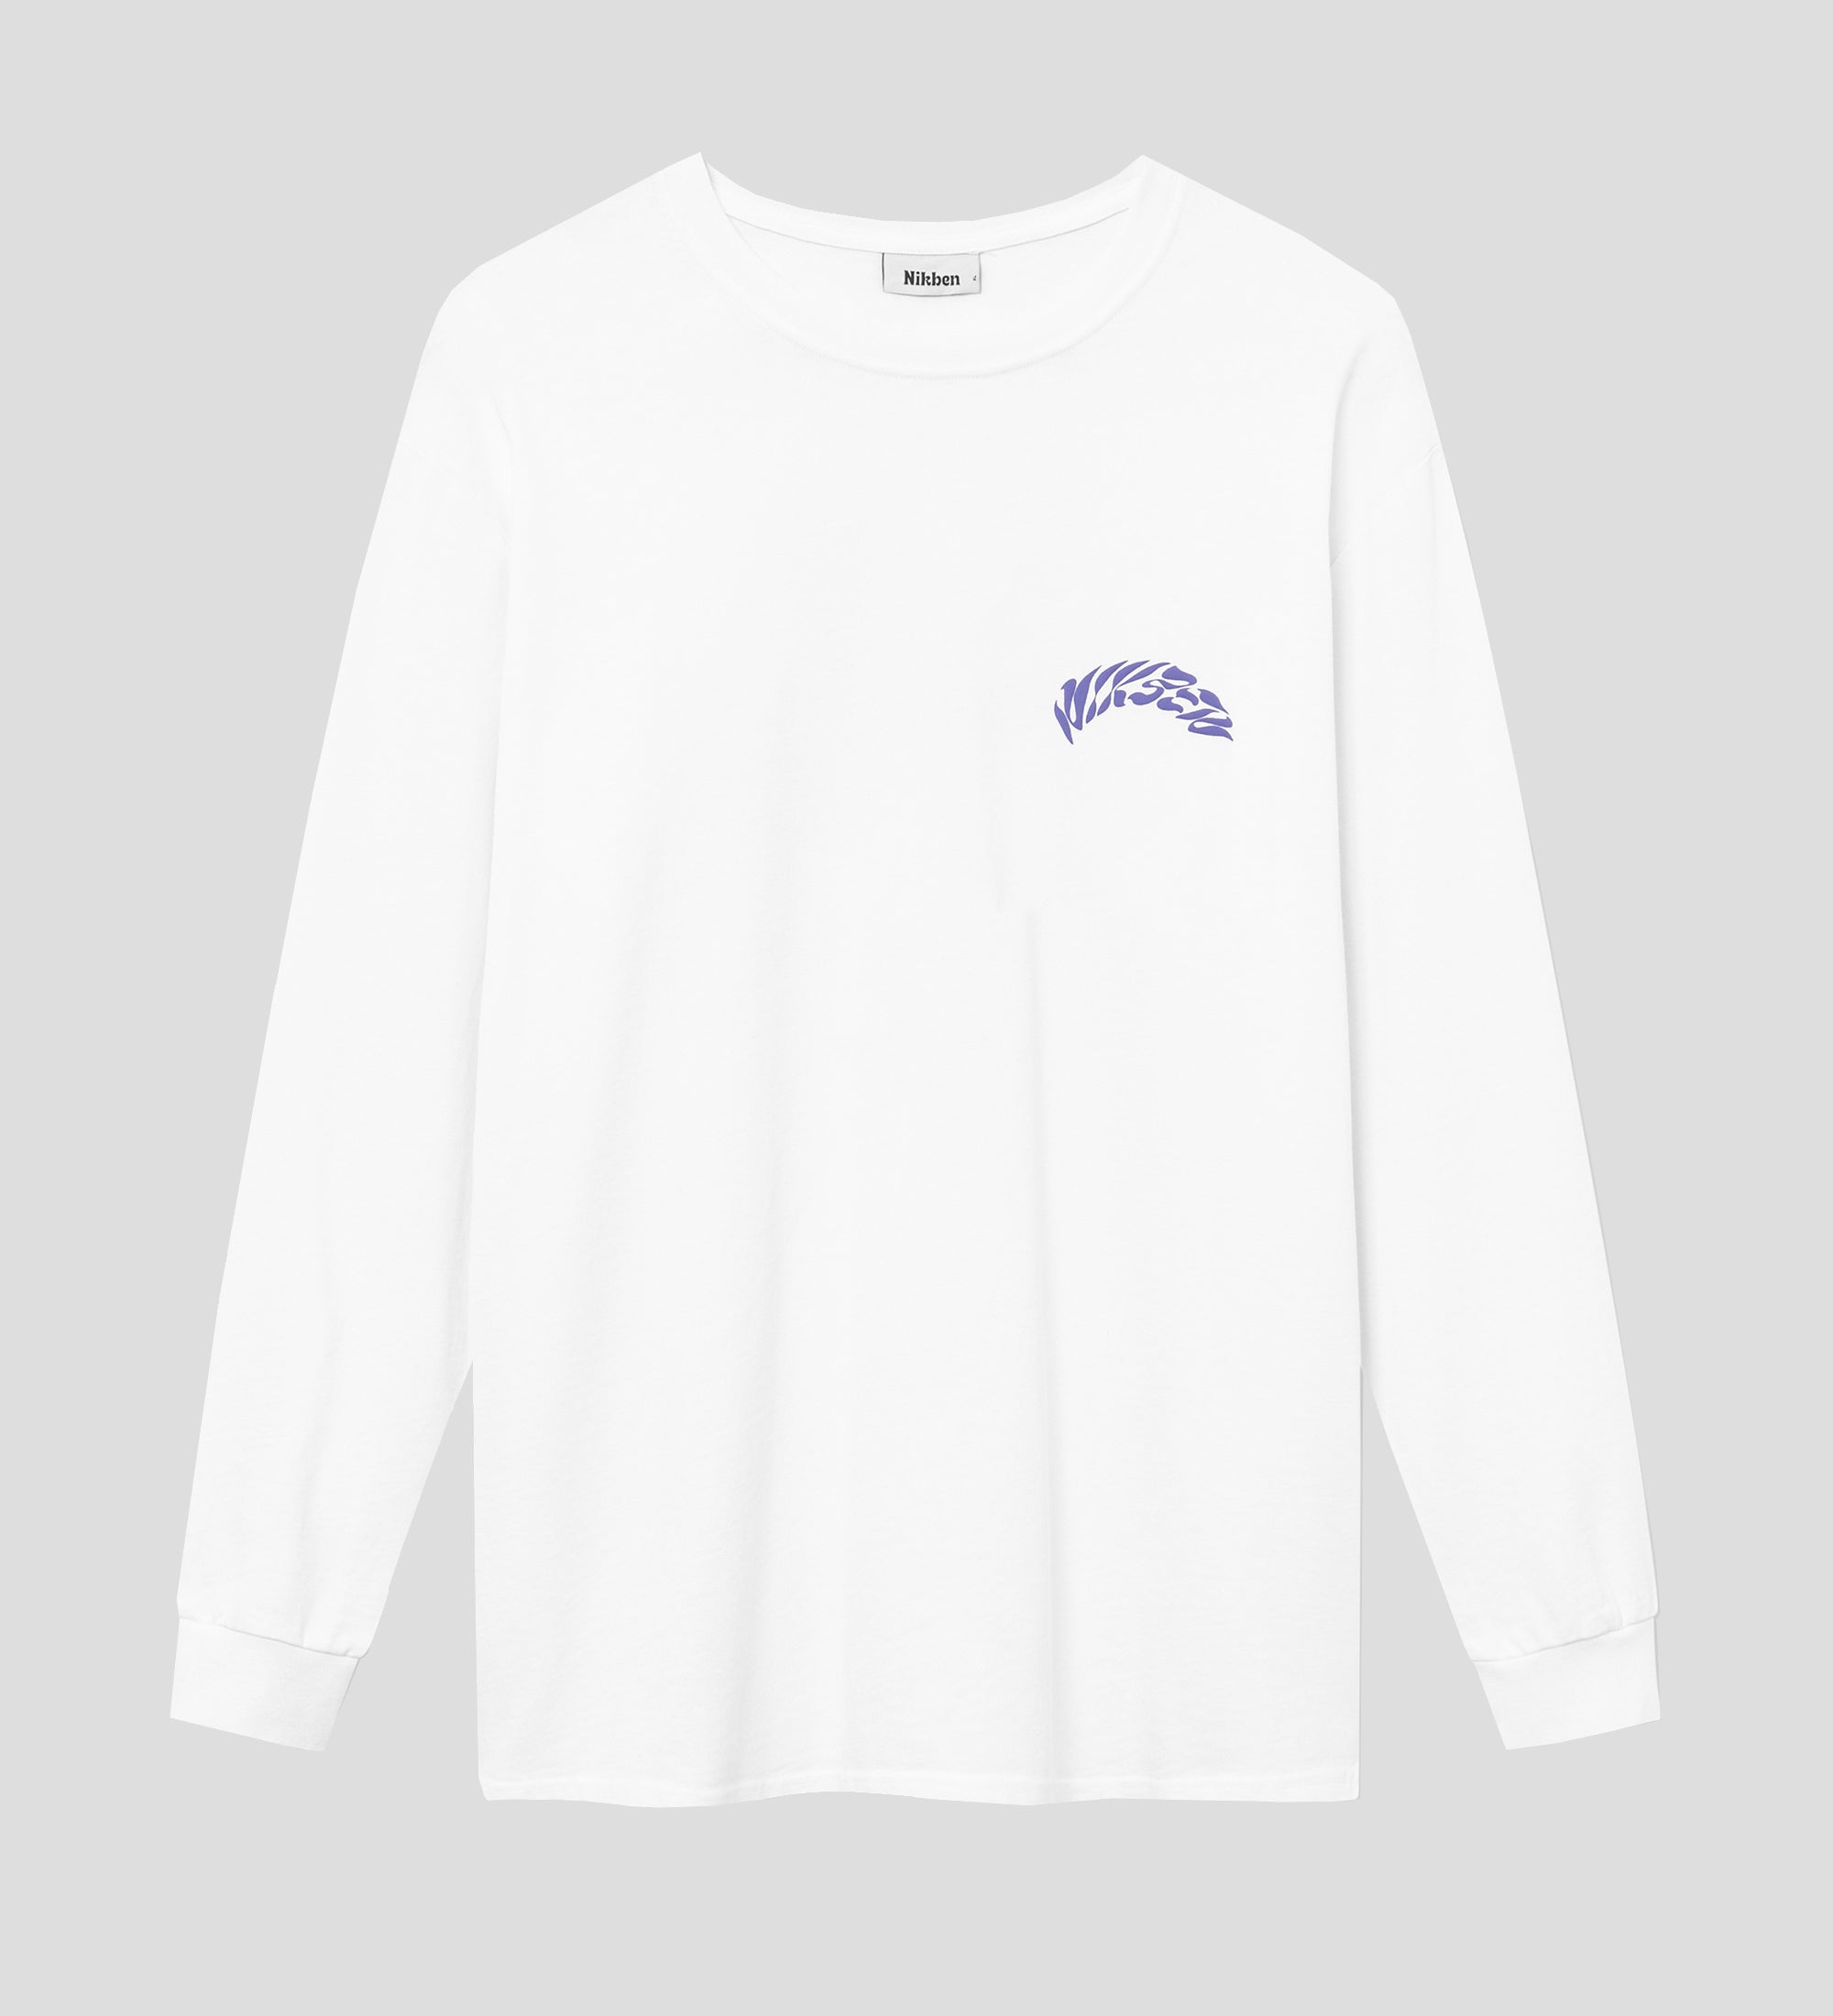 White long-sleeved t-shirt with purple "Nikben" logo on the chest.